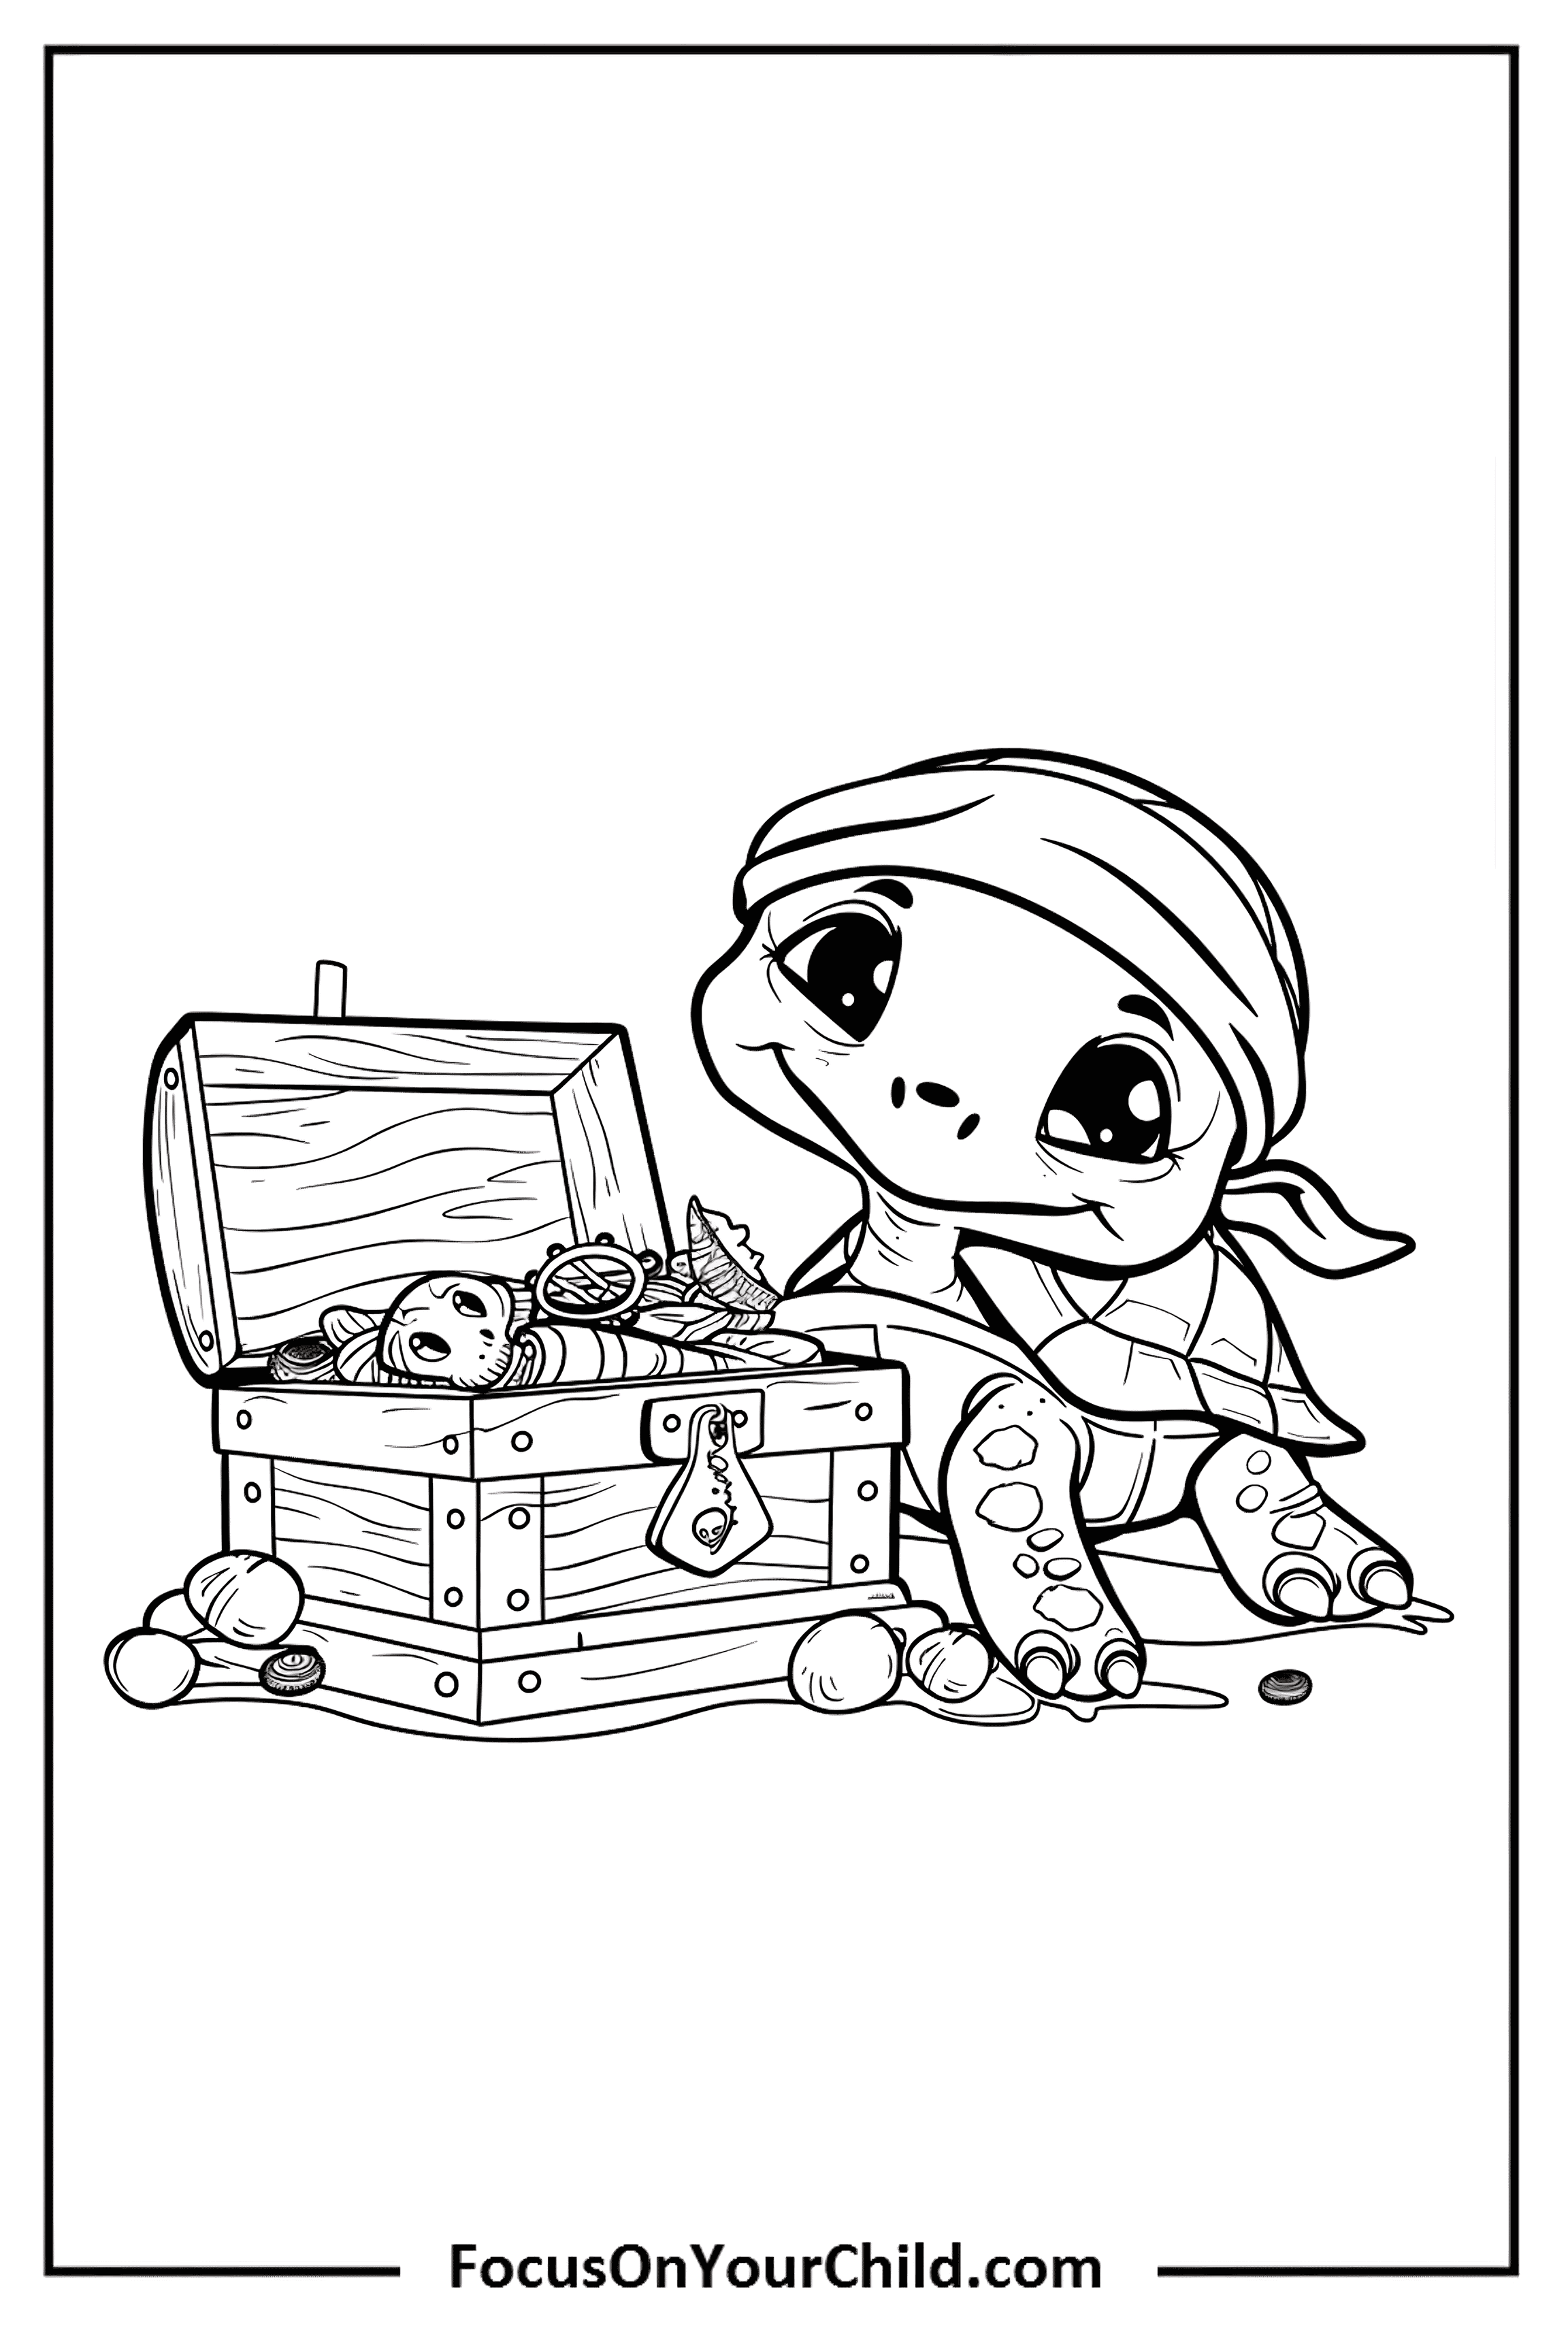 Adorable baby turtle exploring treasure chest in black and white coloring illustration.